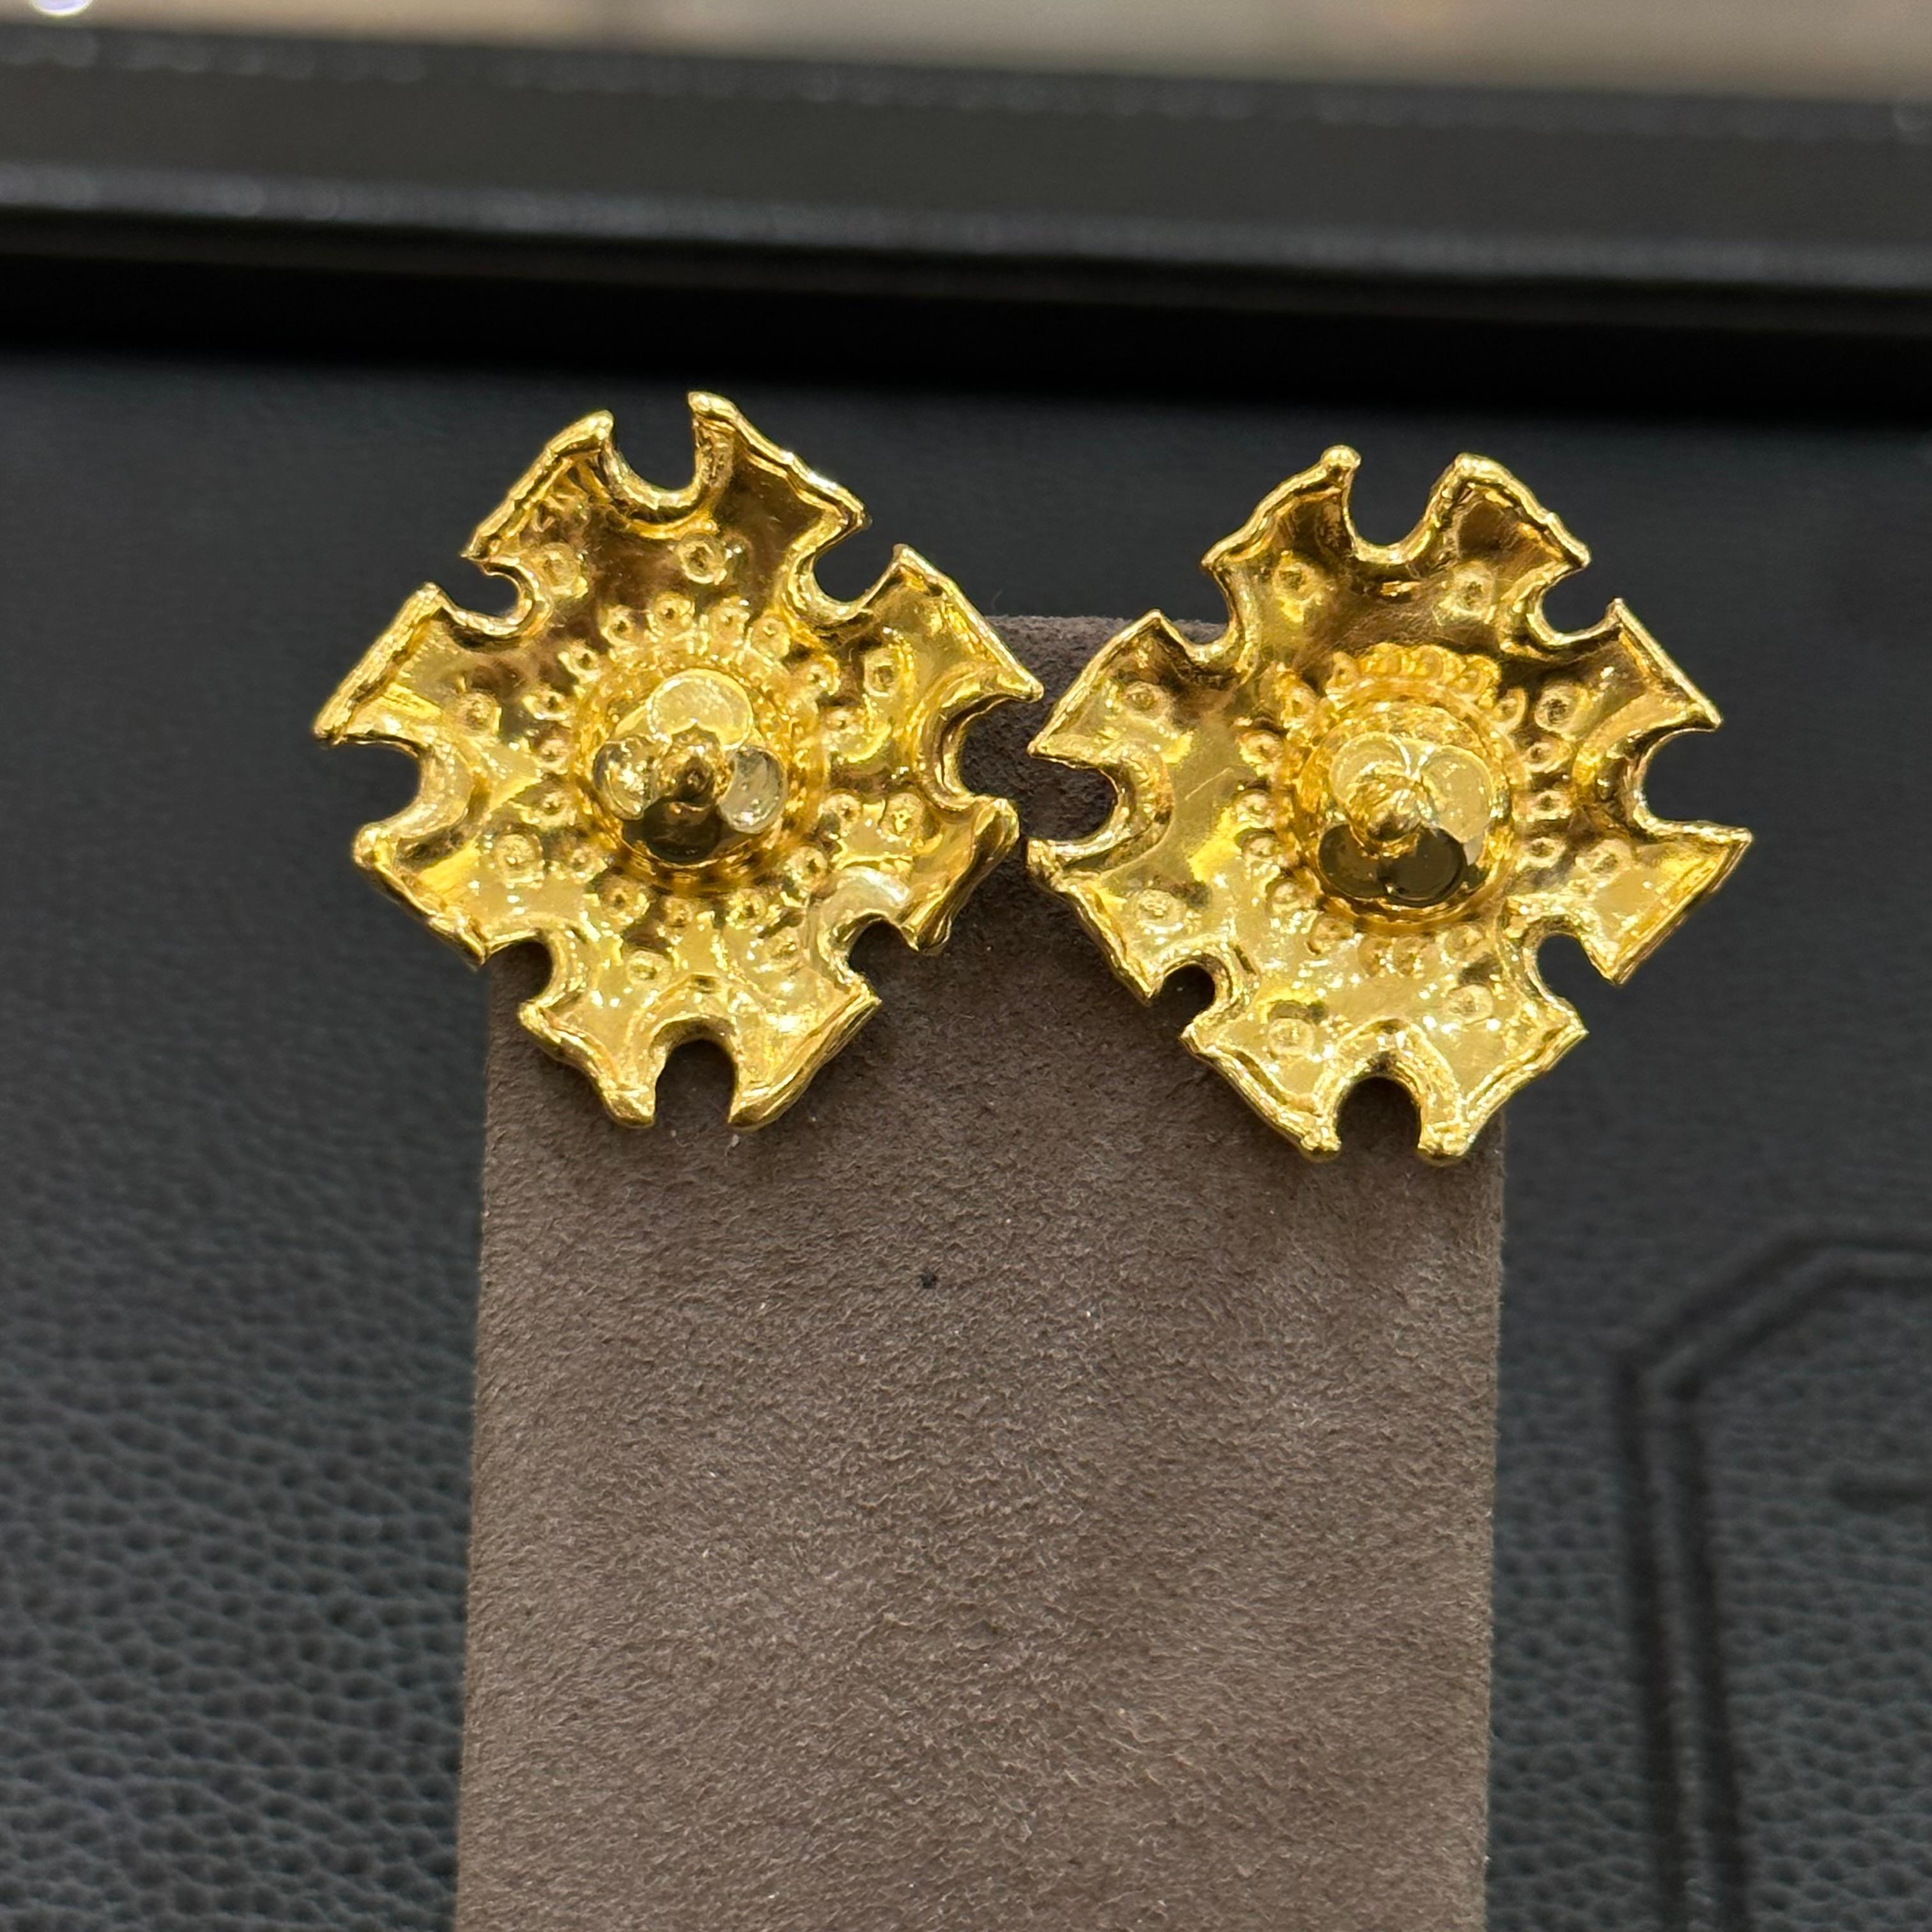 22K Jean Mahie Earrings. Square with Indented Edges and Small Dome Center. 13.50 Grams of 22K Gold.
